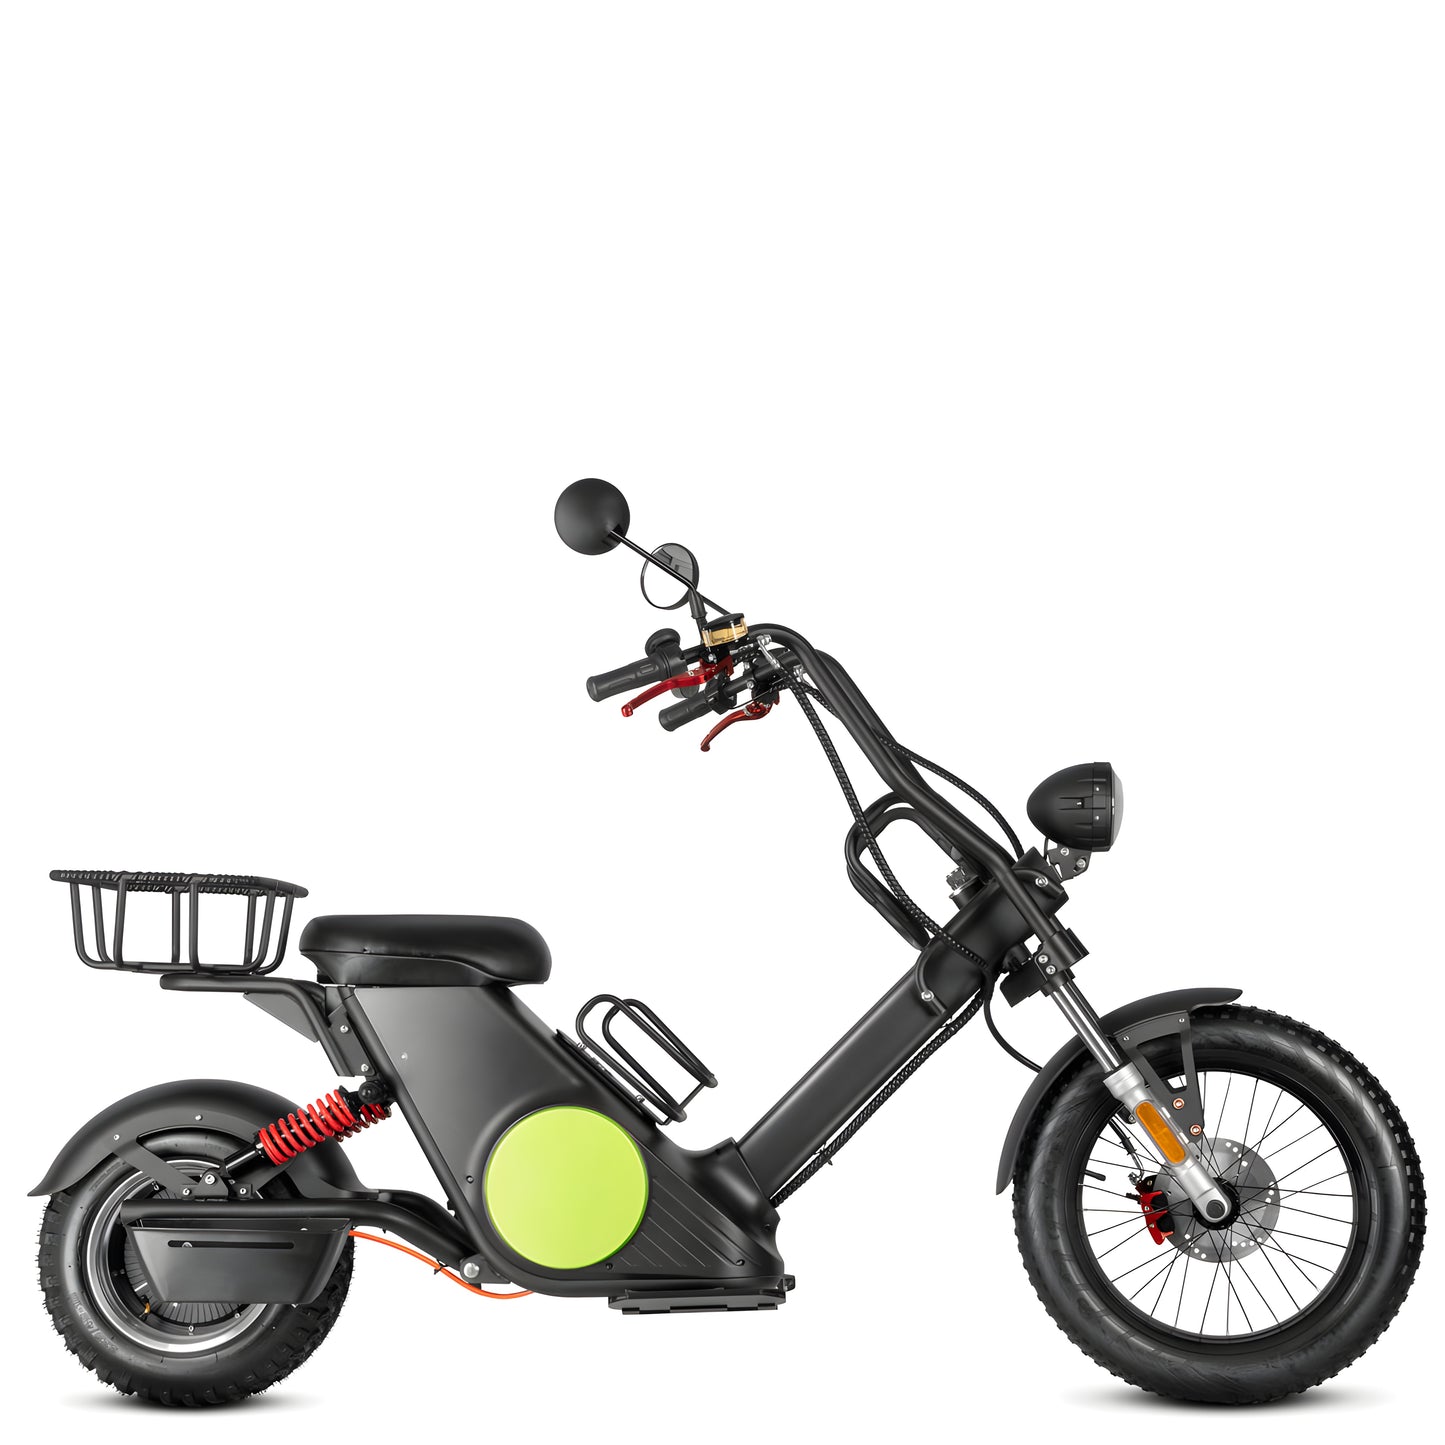 M6G Electric Golf Cart Scooter - Black